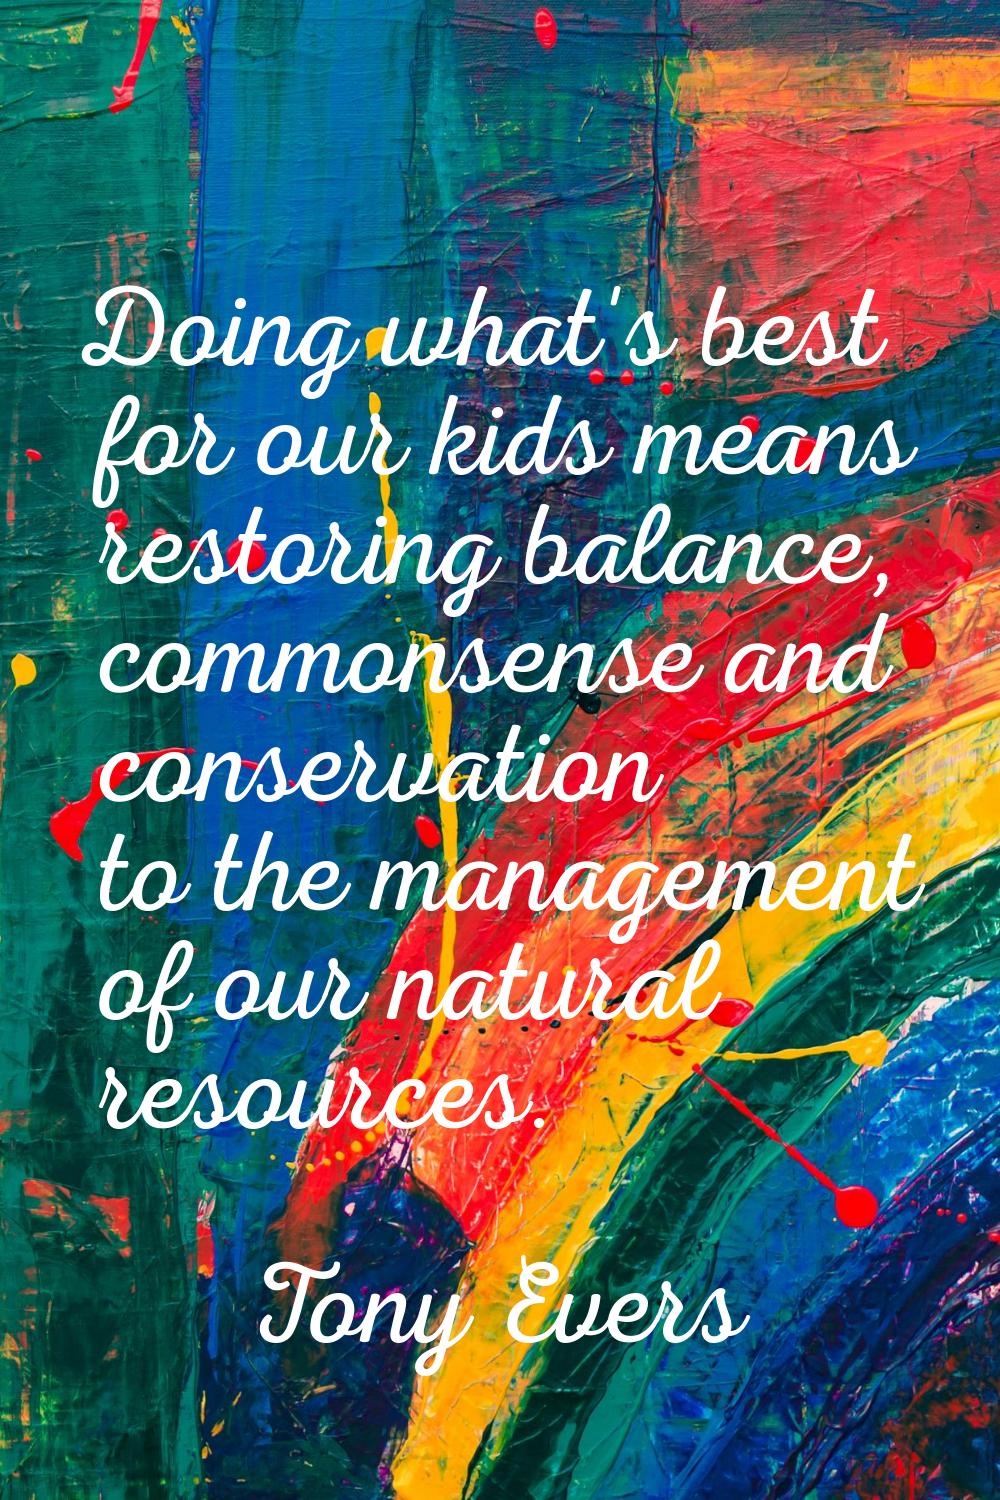 Doing what's best for our kids means restoring balance, commonsense and conservation to the managem